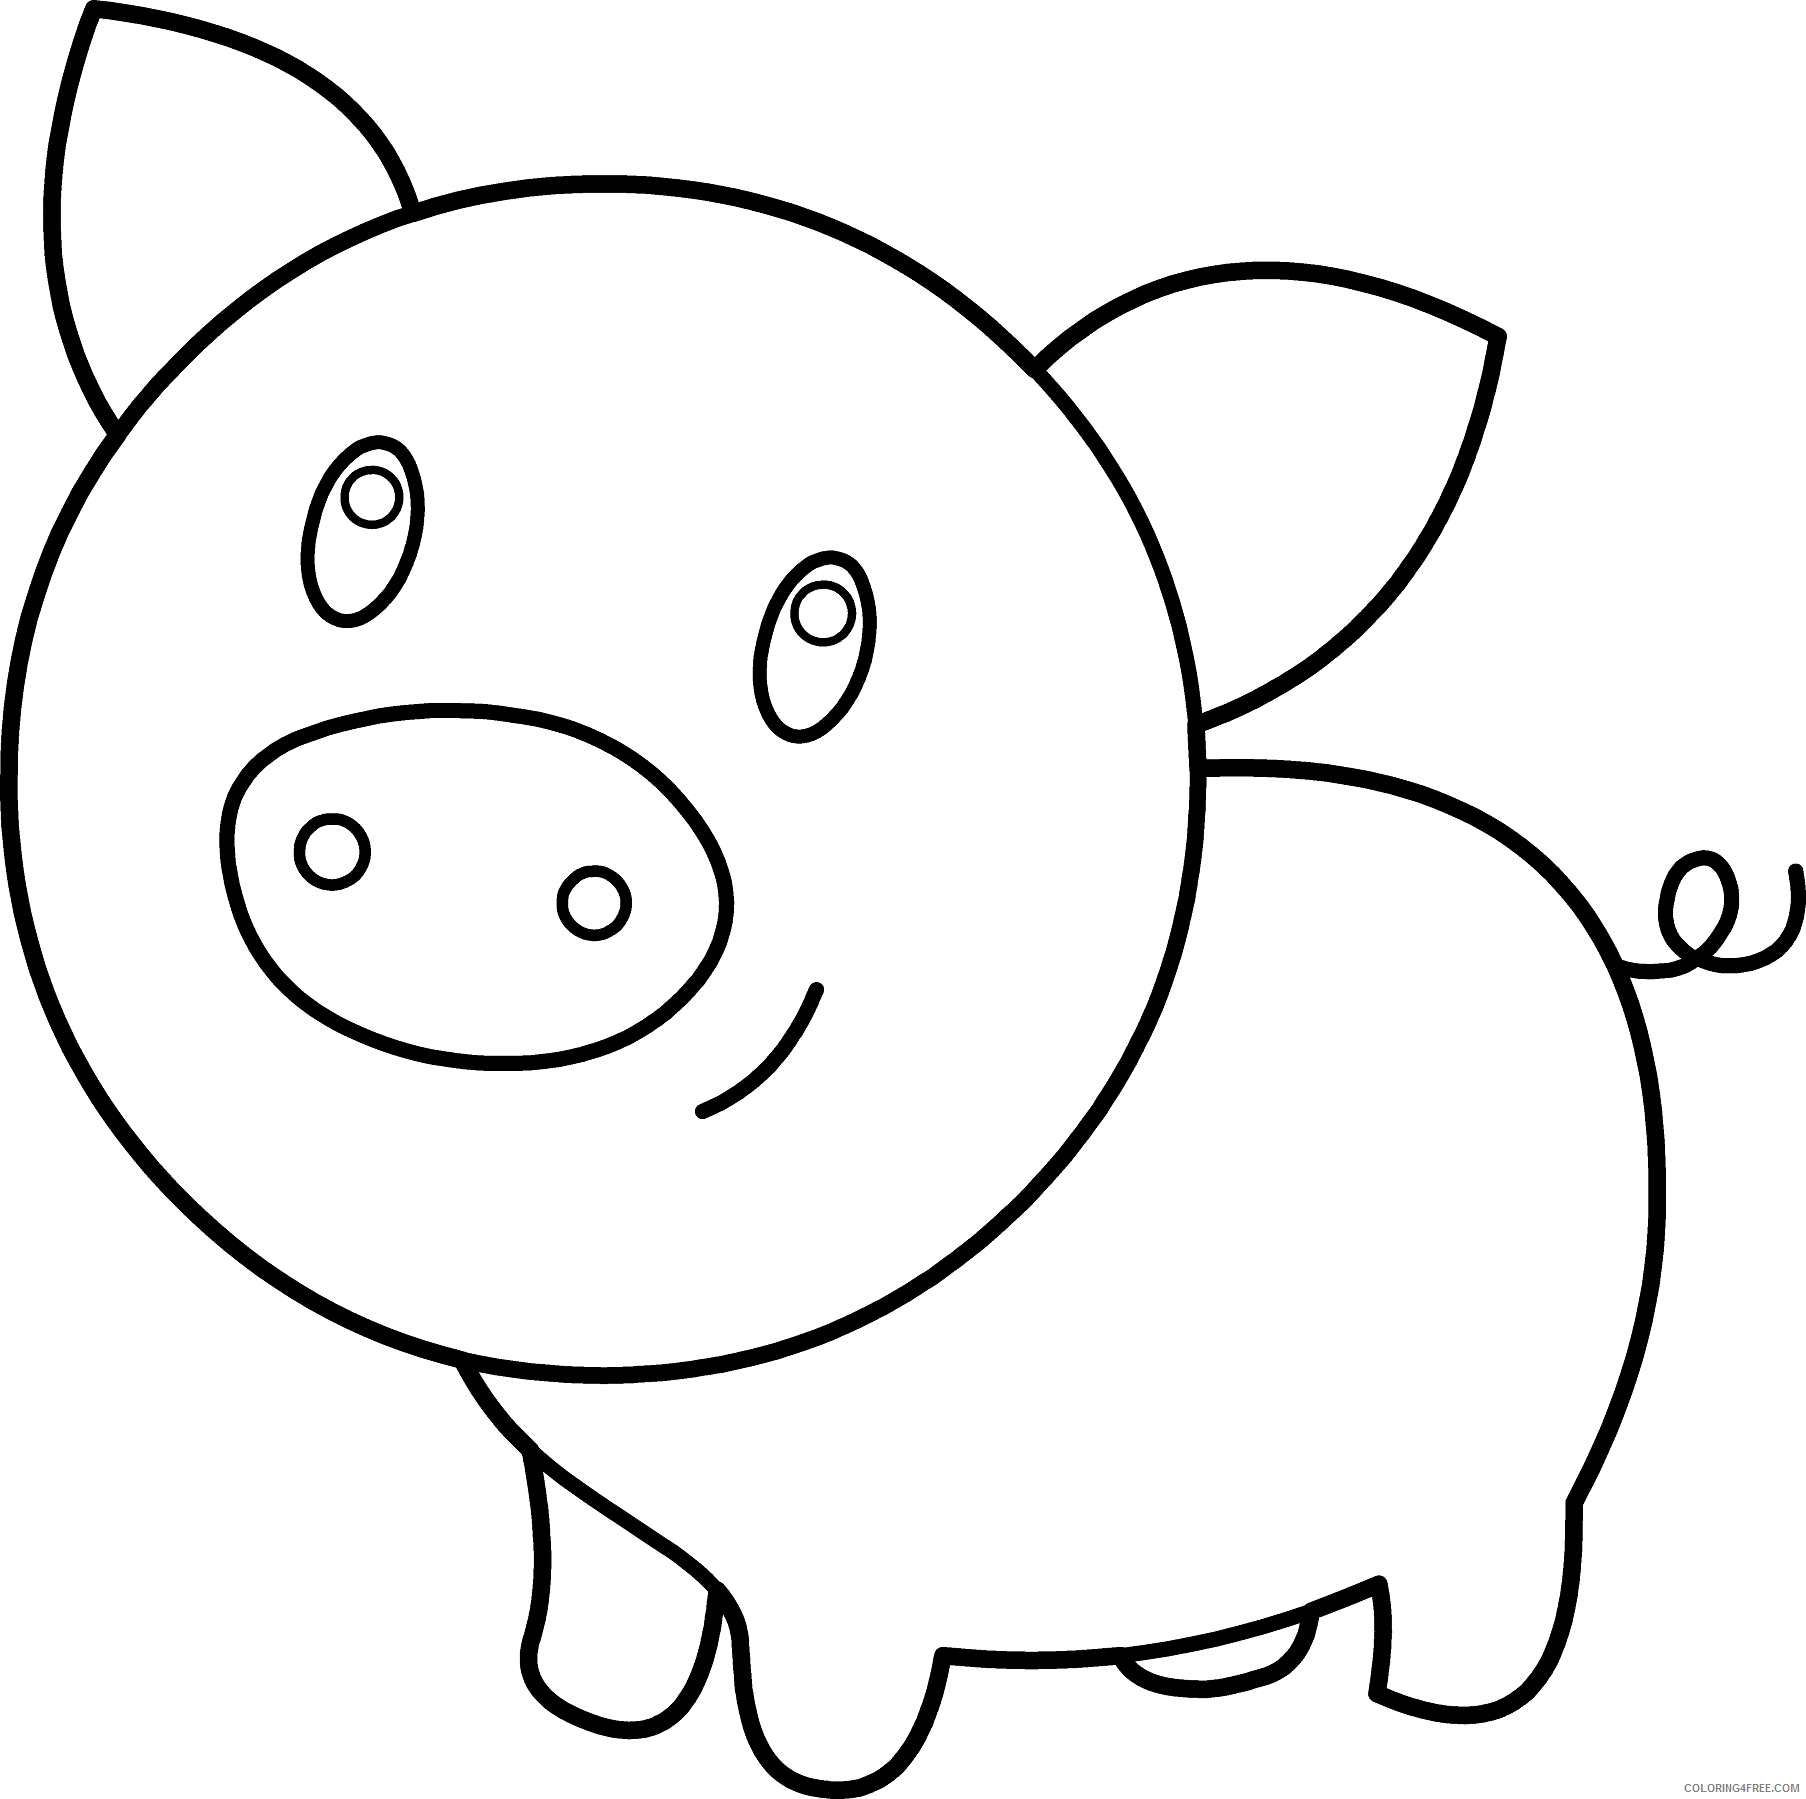 Pig Outline Coloring Pages pig pen bfree Printable Coloring4free